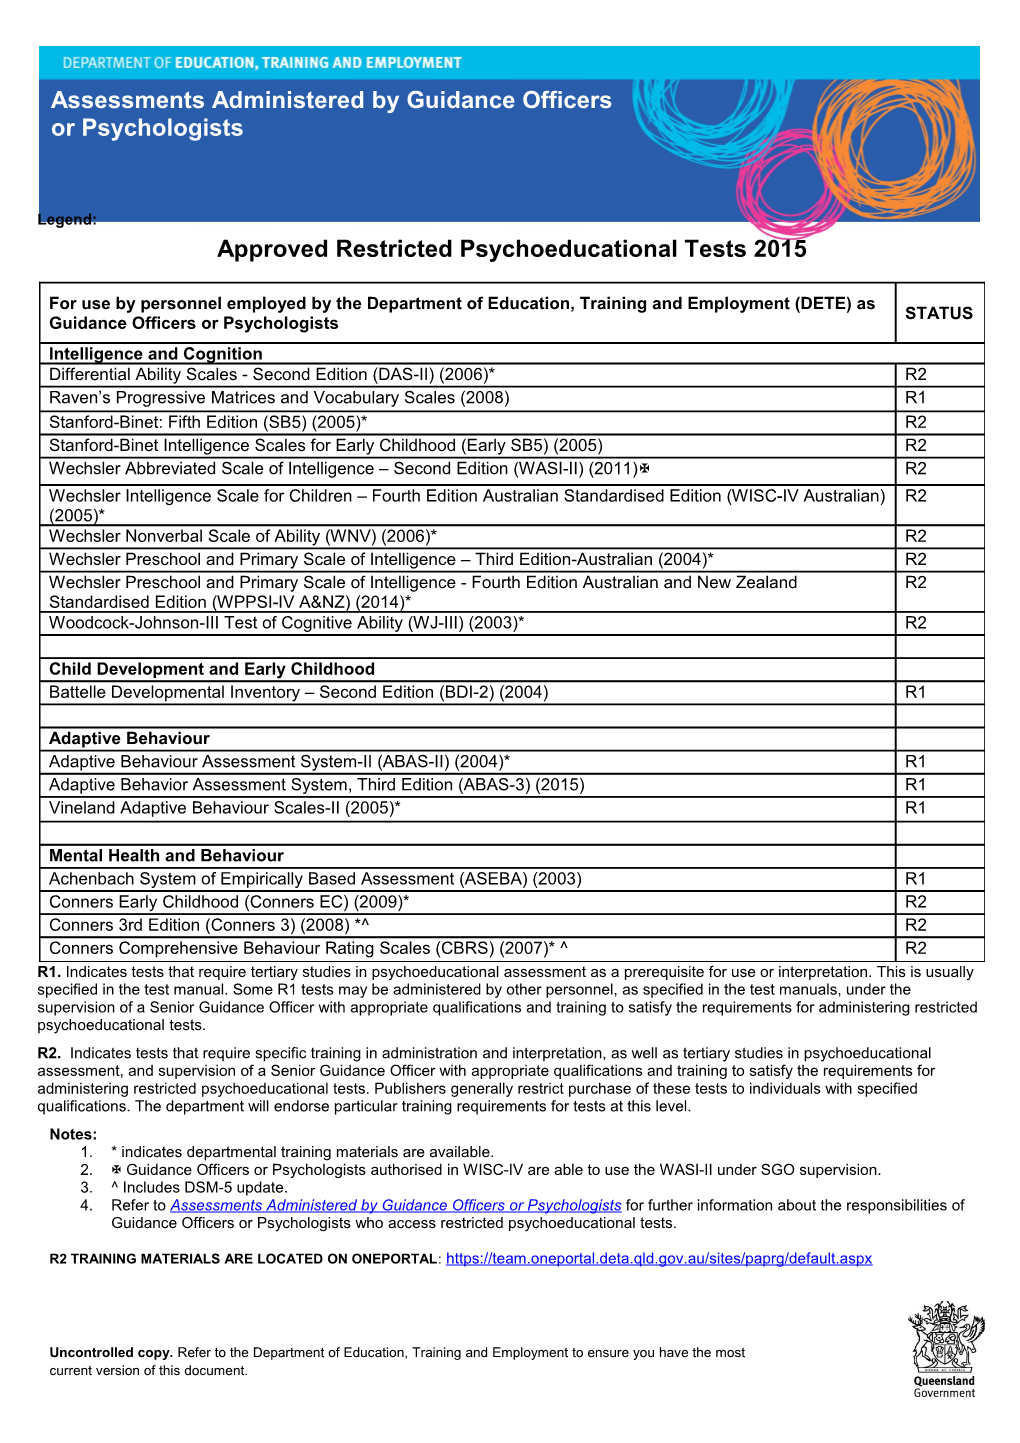 List of Approved Restricted Psychoeducational Tests 2012